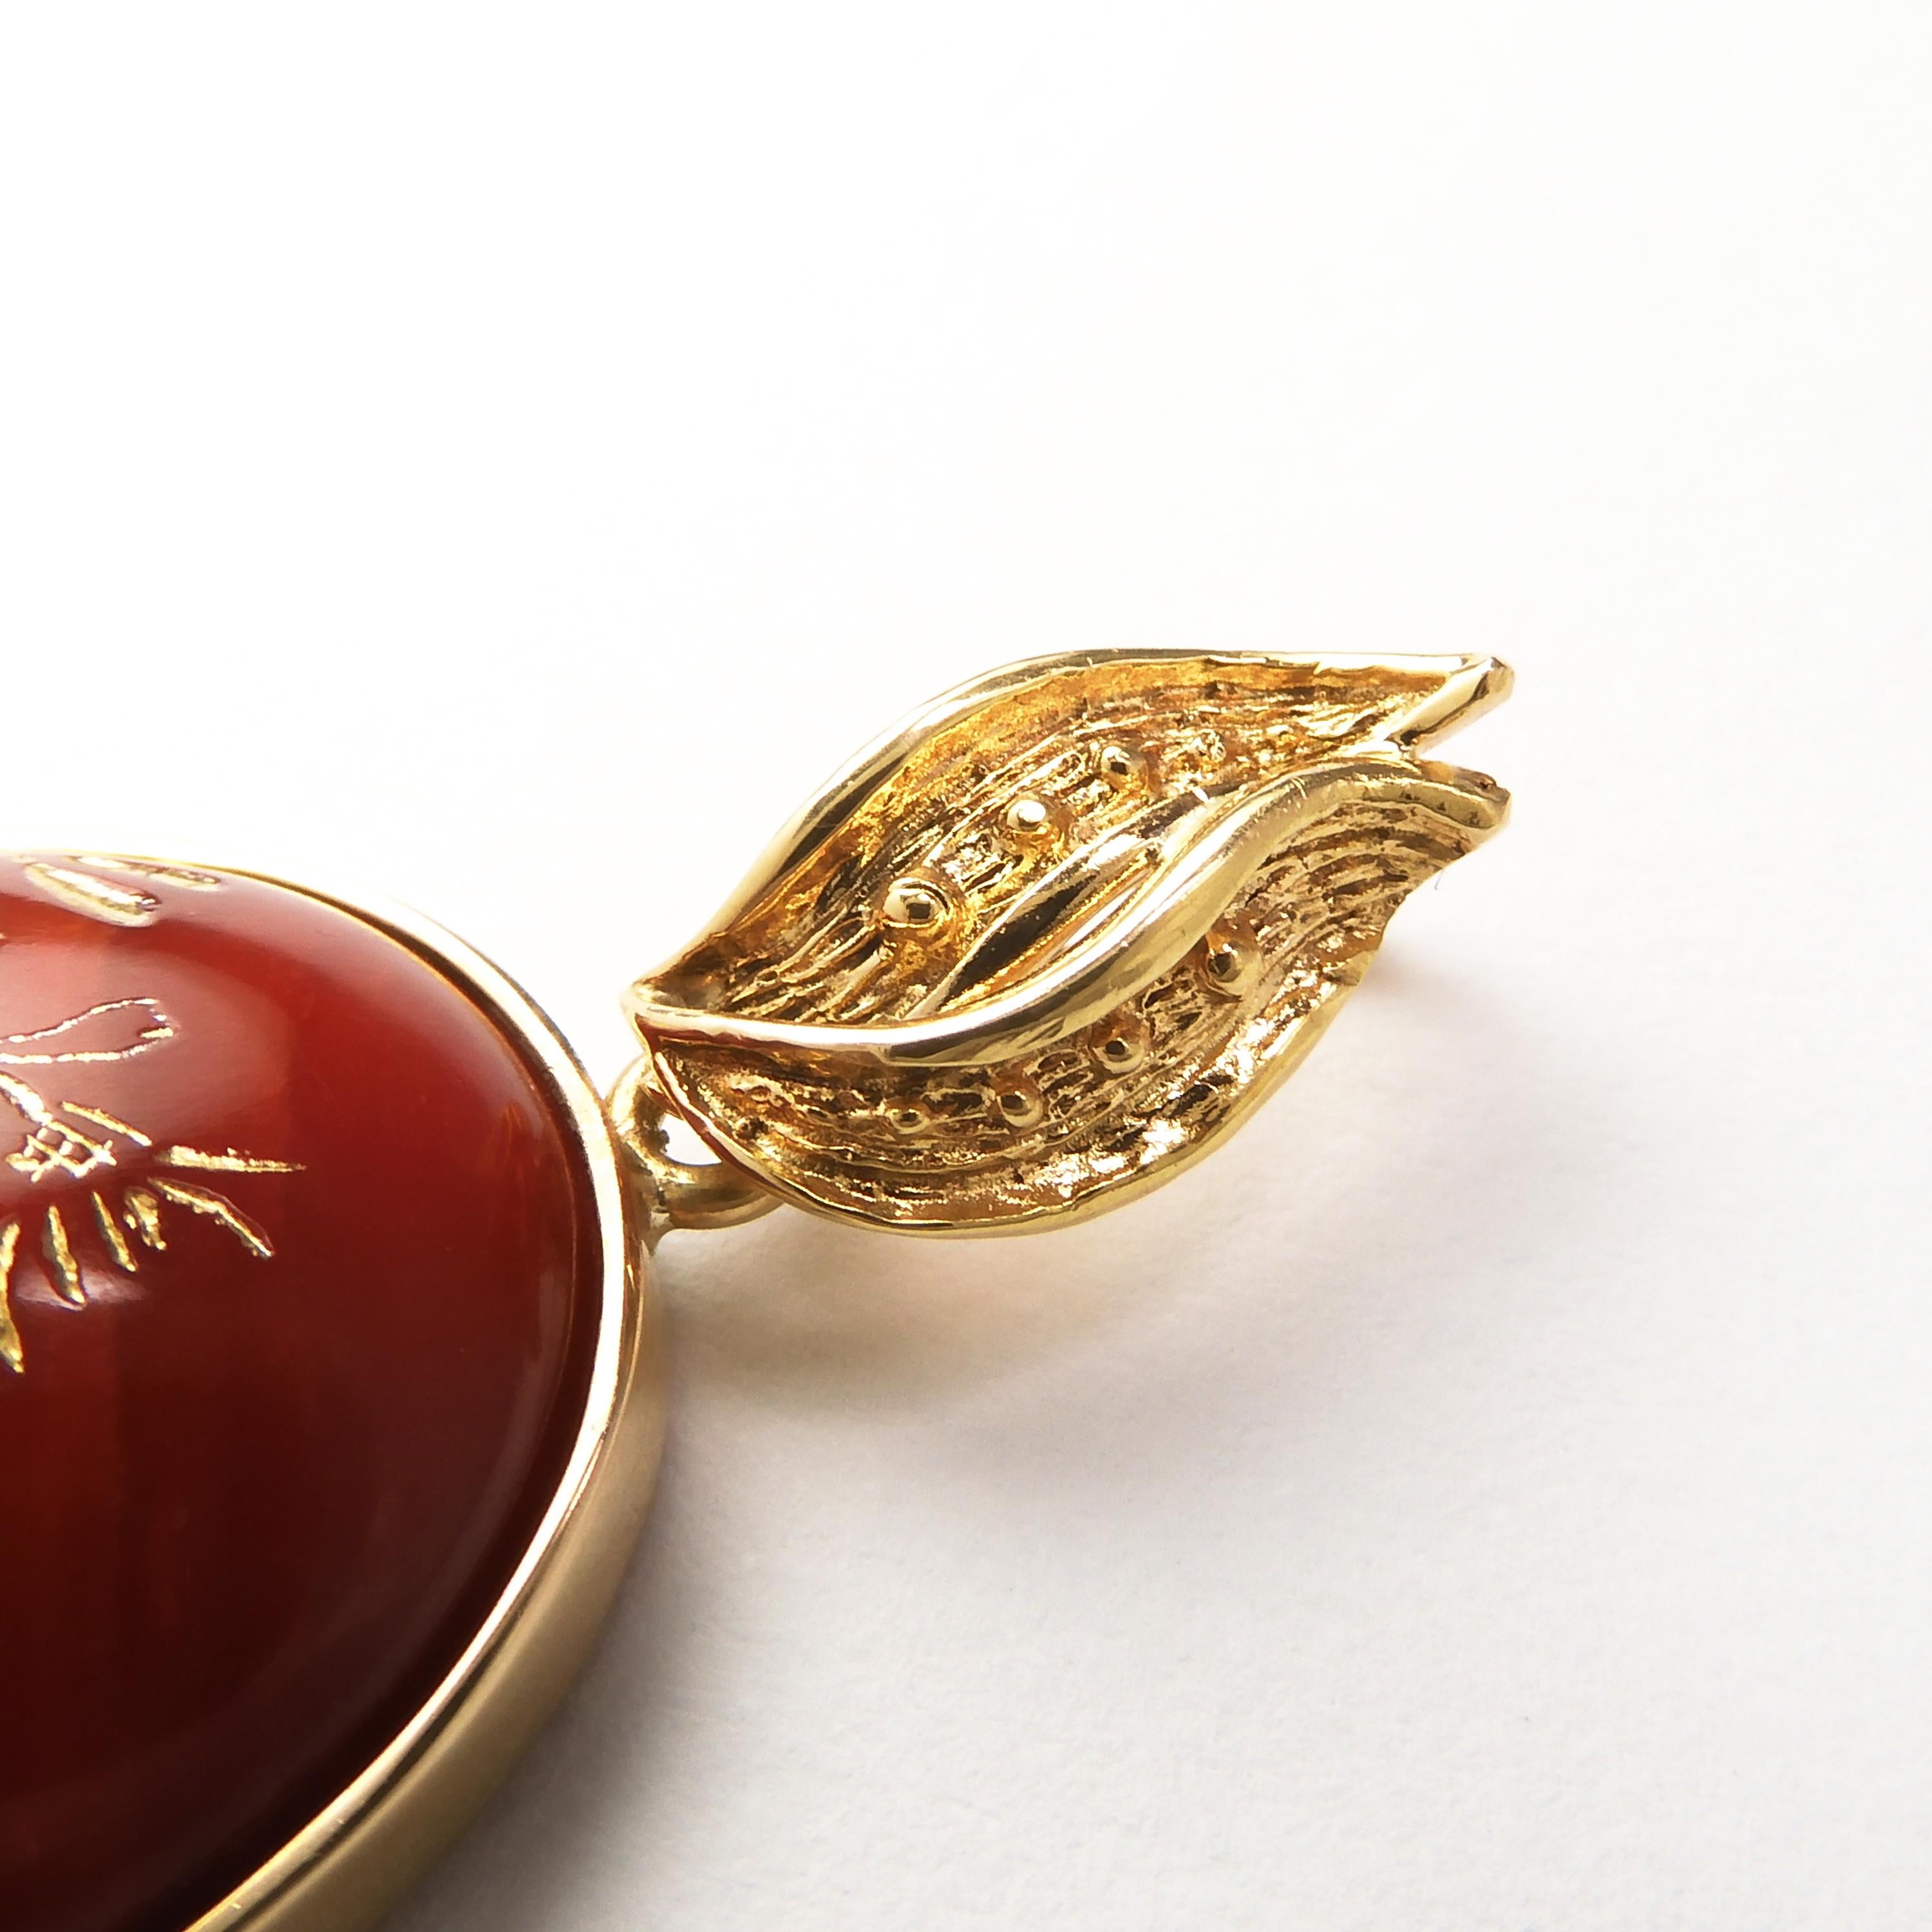 Oval Cut 18 Karat Yellow Gold Oxblood Coral Chrysanthemum Engraved Oval Pendant Top For Sale